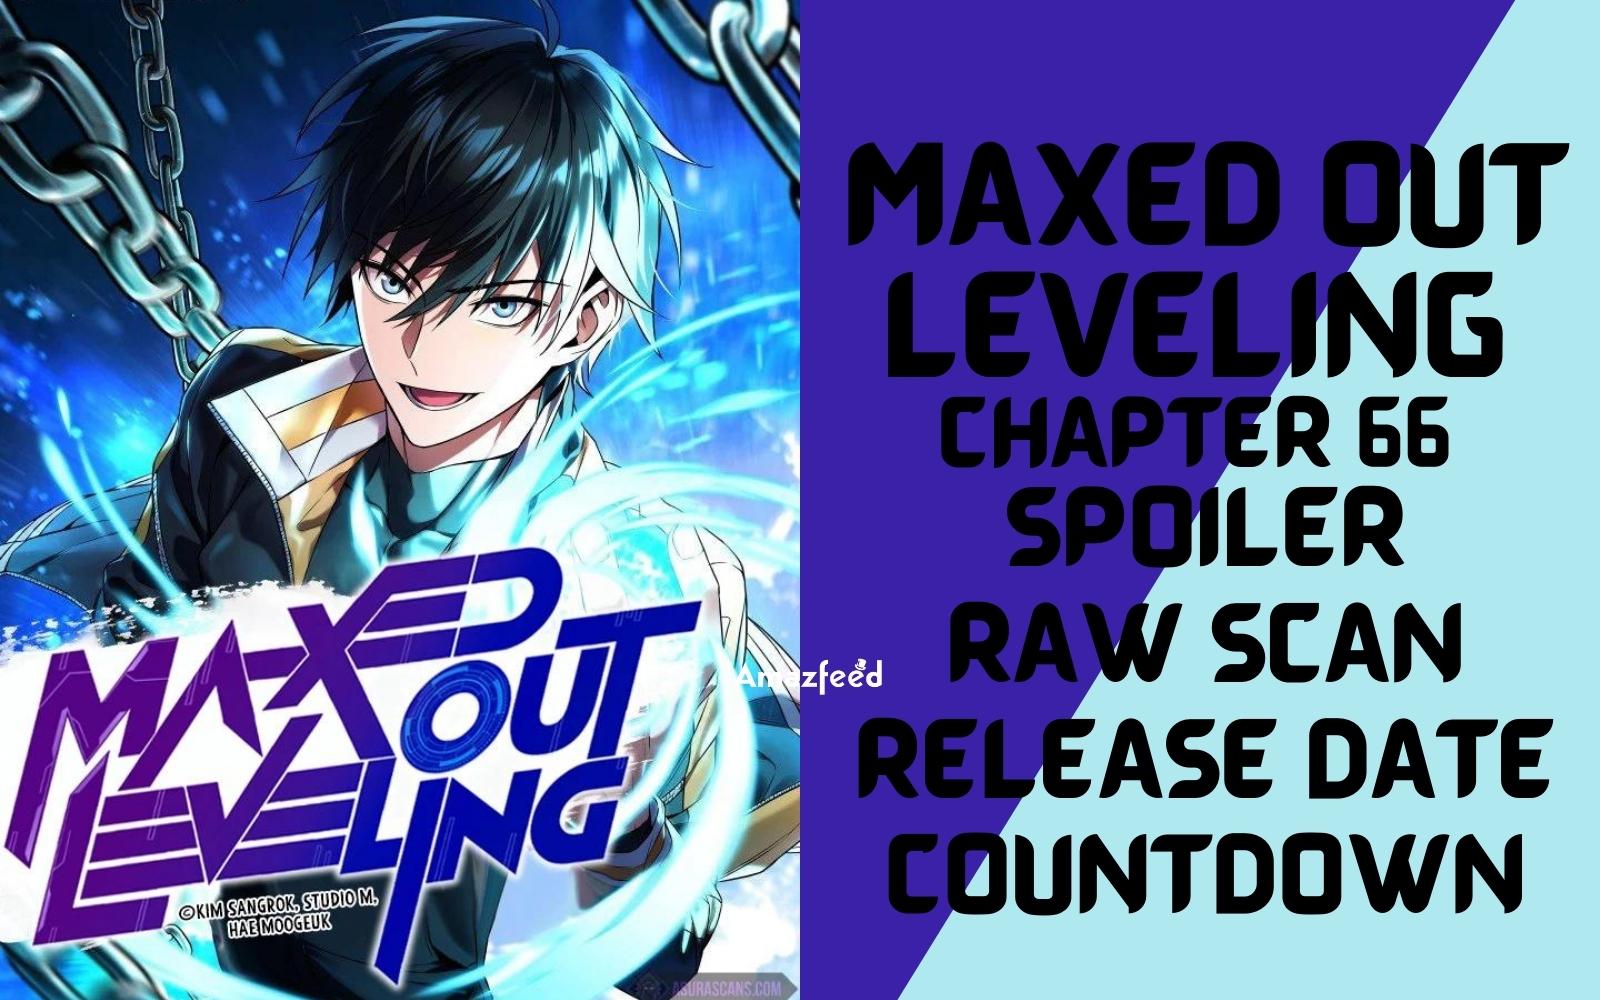 Maxed Out Leveling Chapter 66 Spoiler, Raw Scan, Plot, Color Page, Release Date